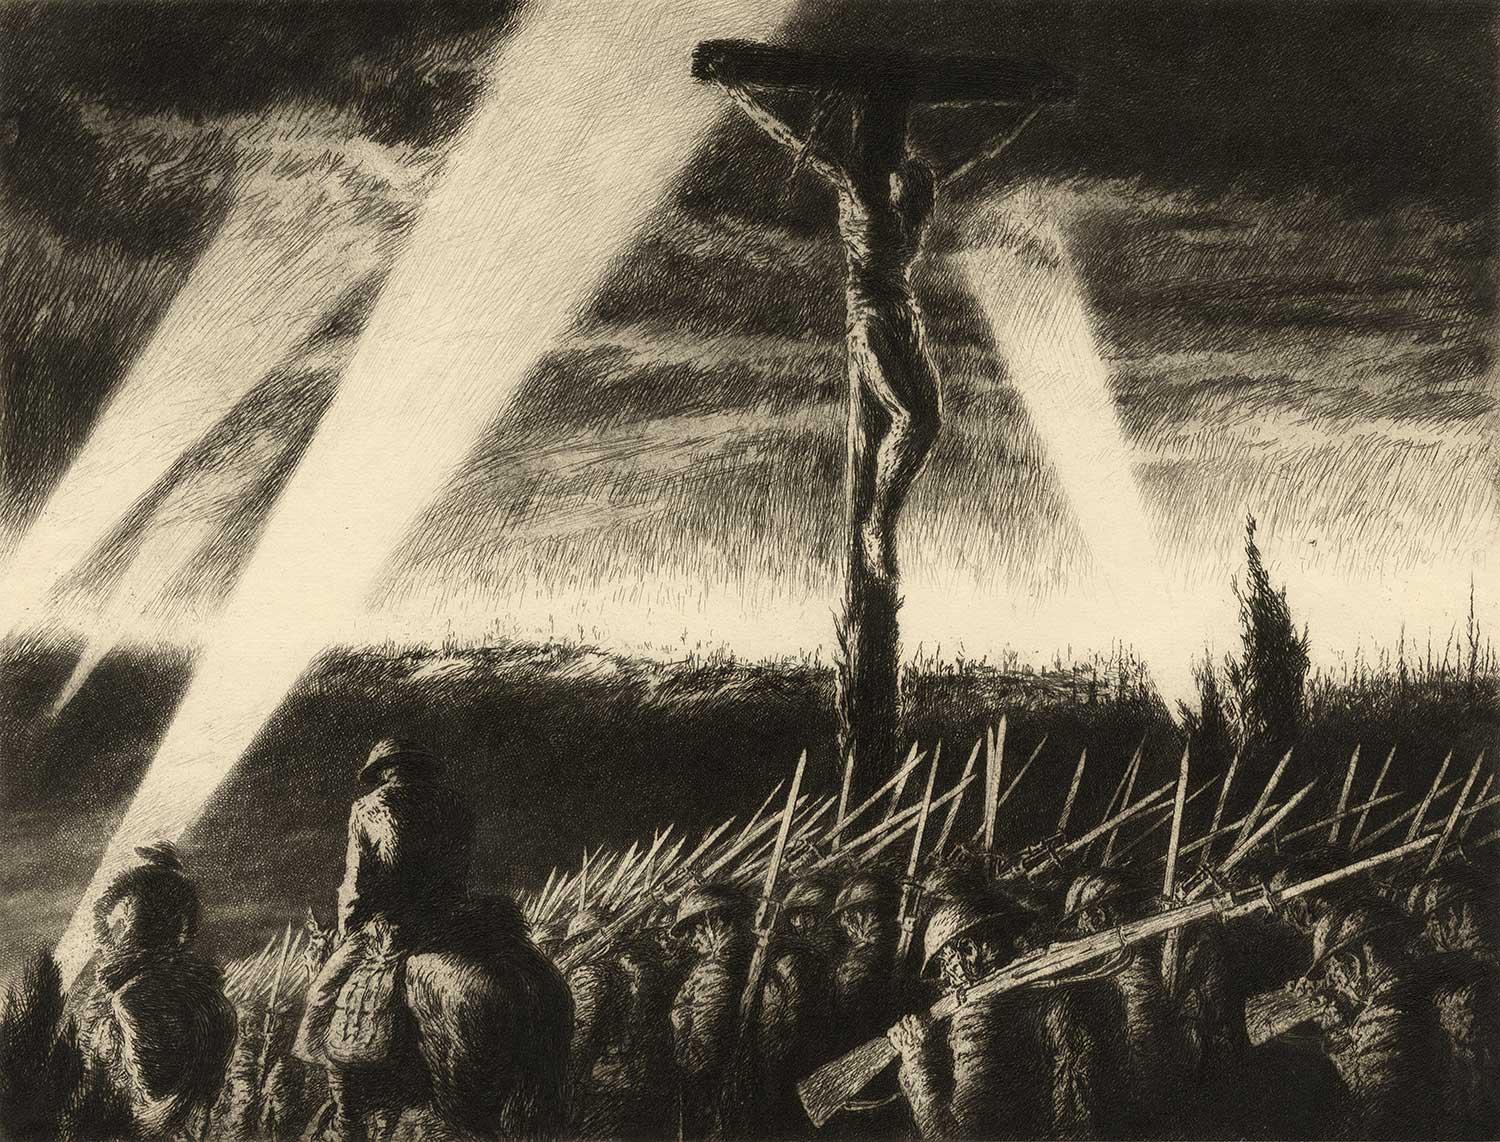 Kerr Eby Landscape Print - Barrage (Eby parallels WWI soldiers sacrifice with sacrifice of Christ on cross)